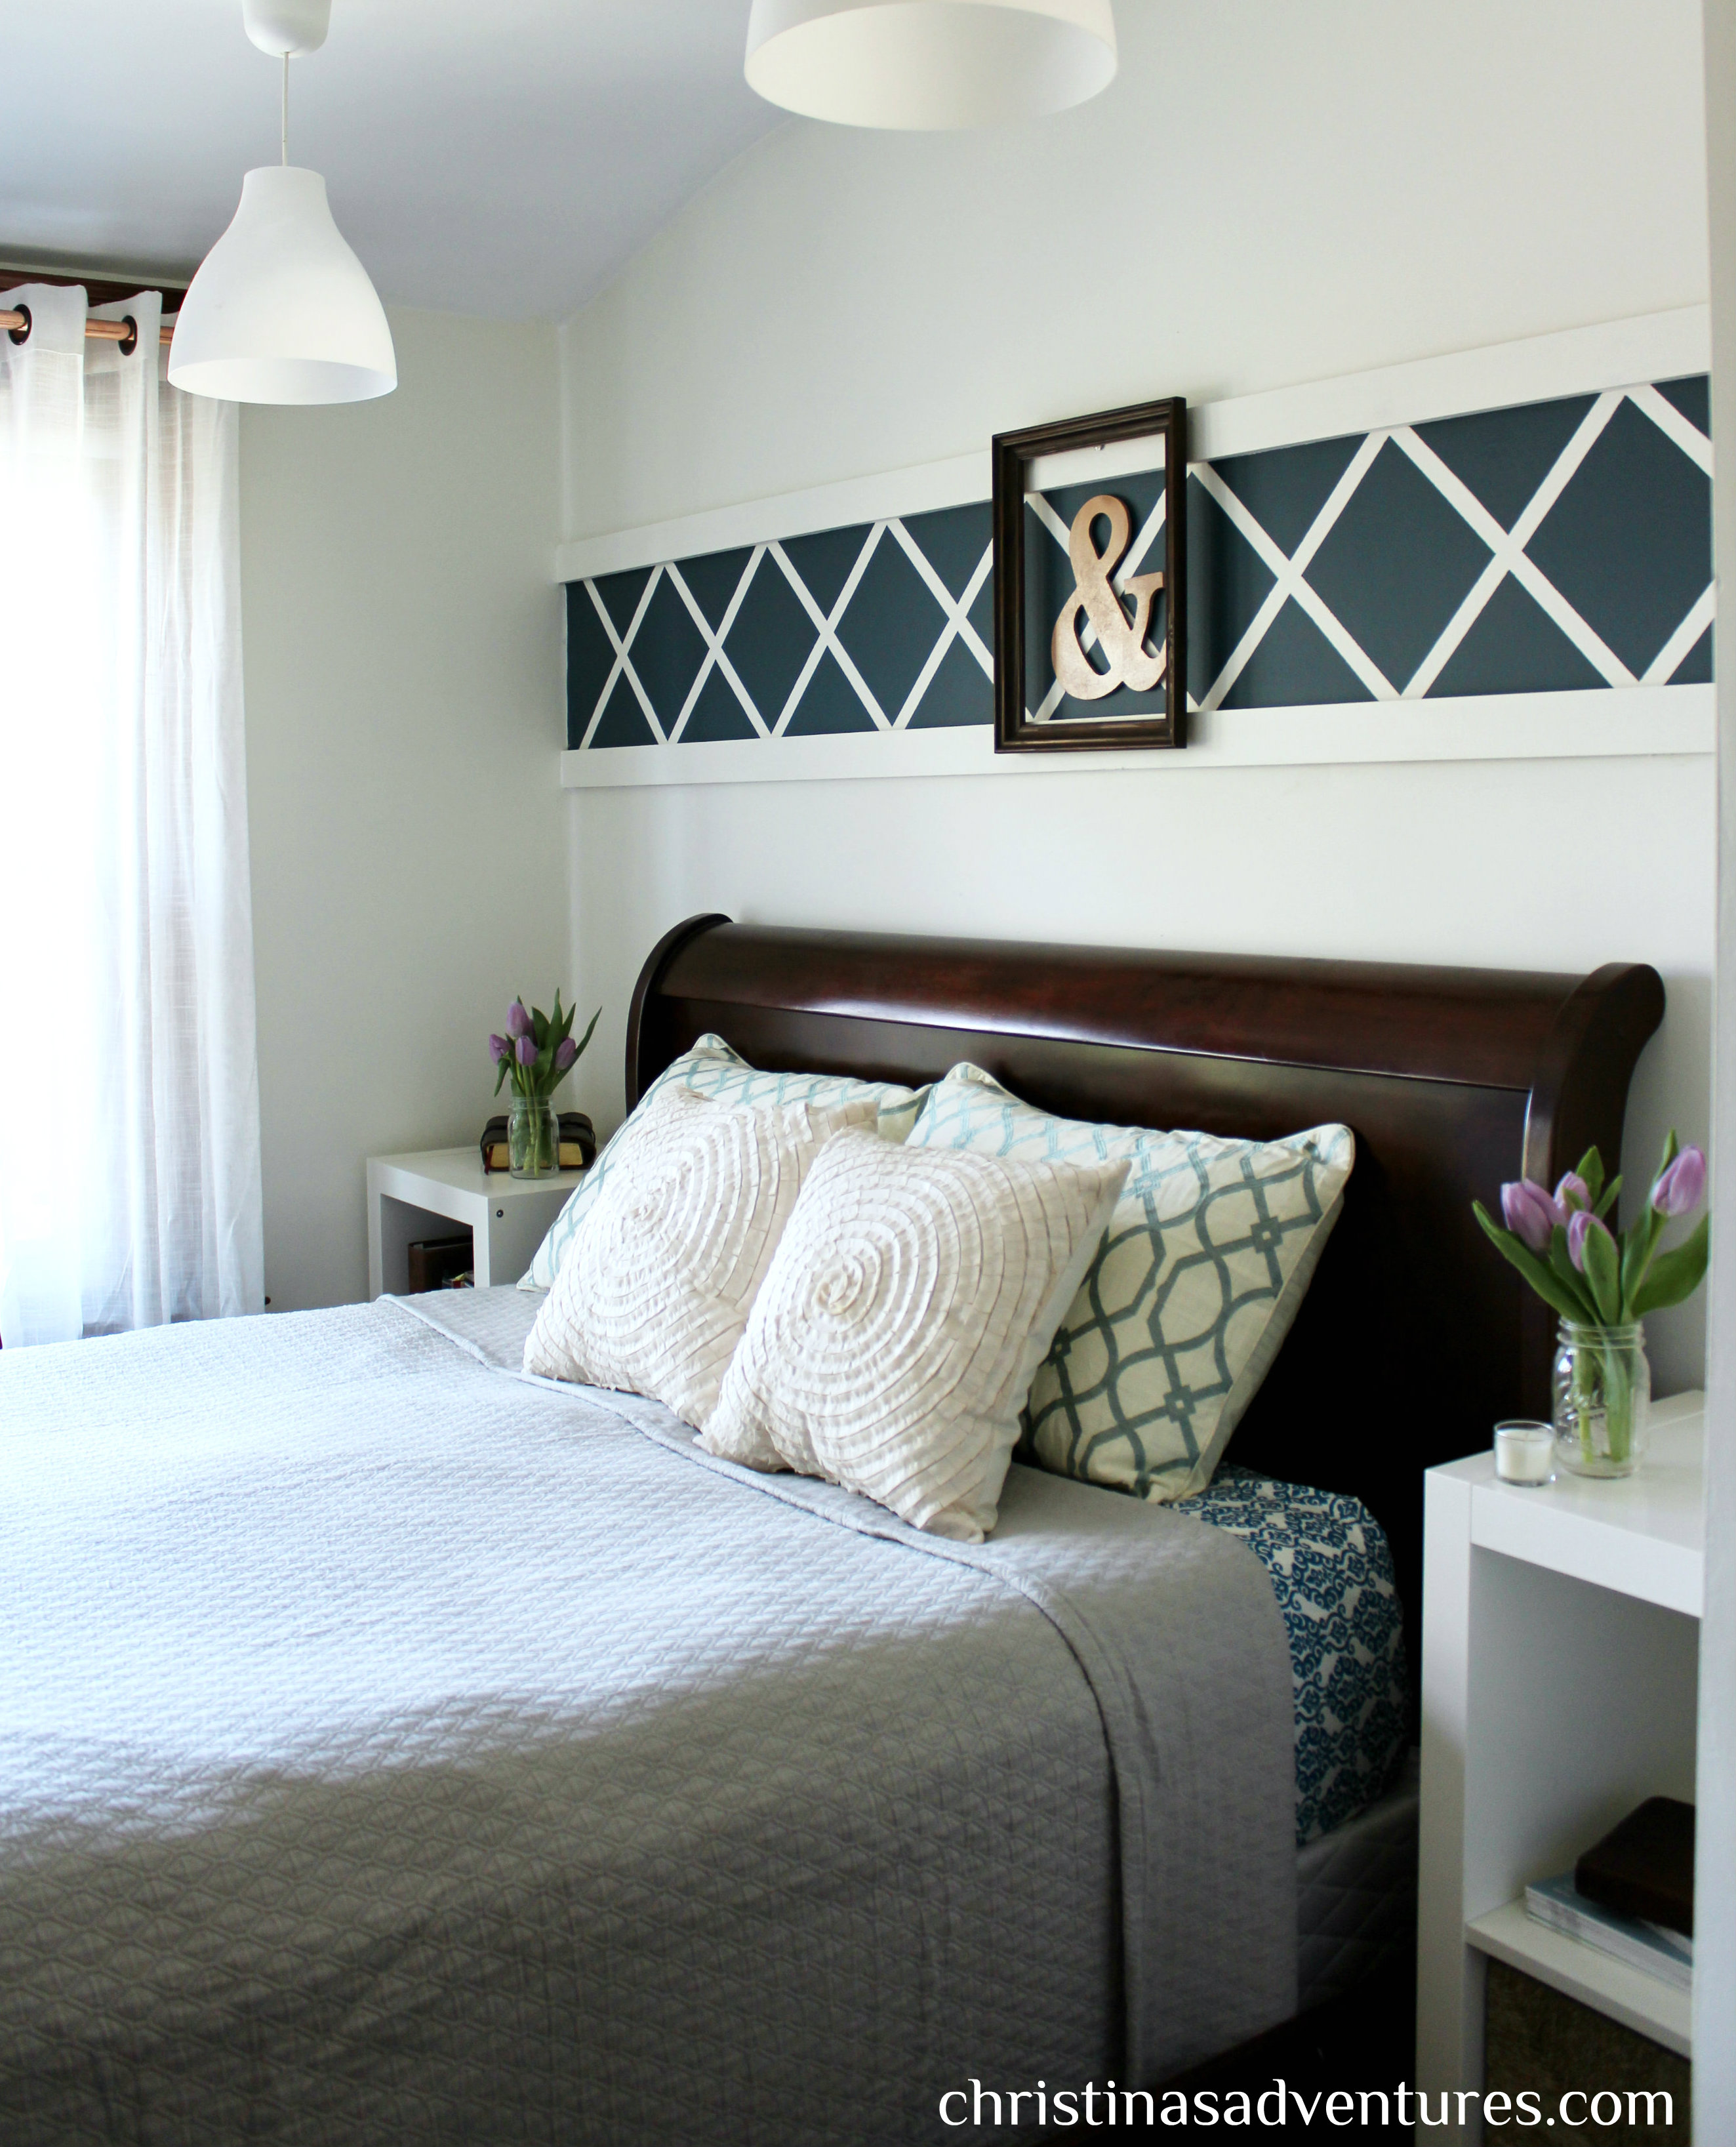 Our Master Bedroom: Above the Bed Decor